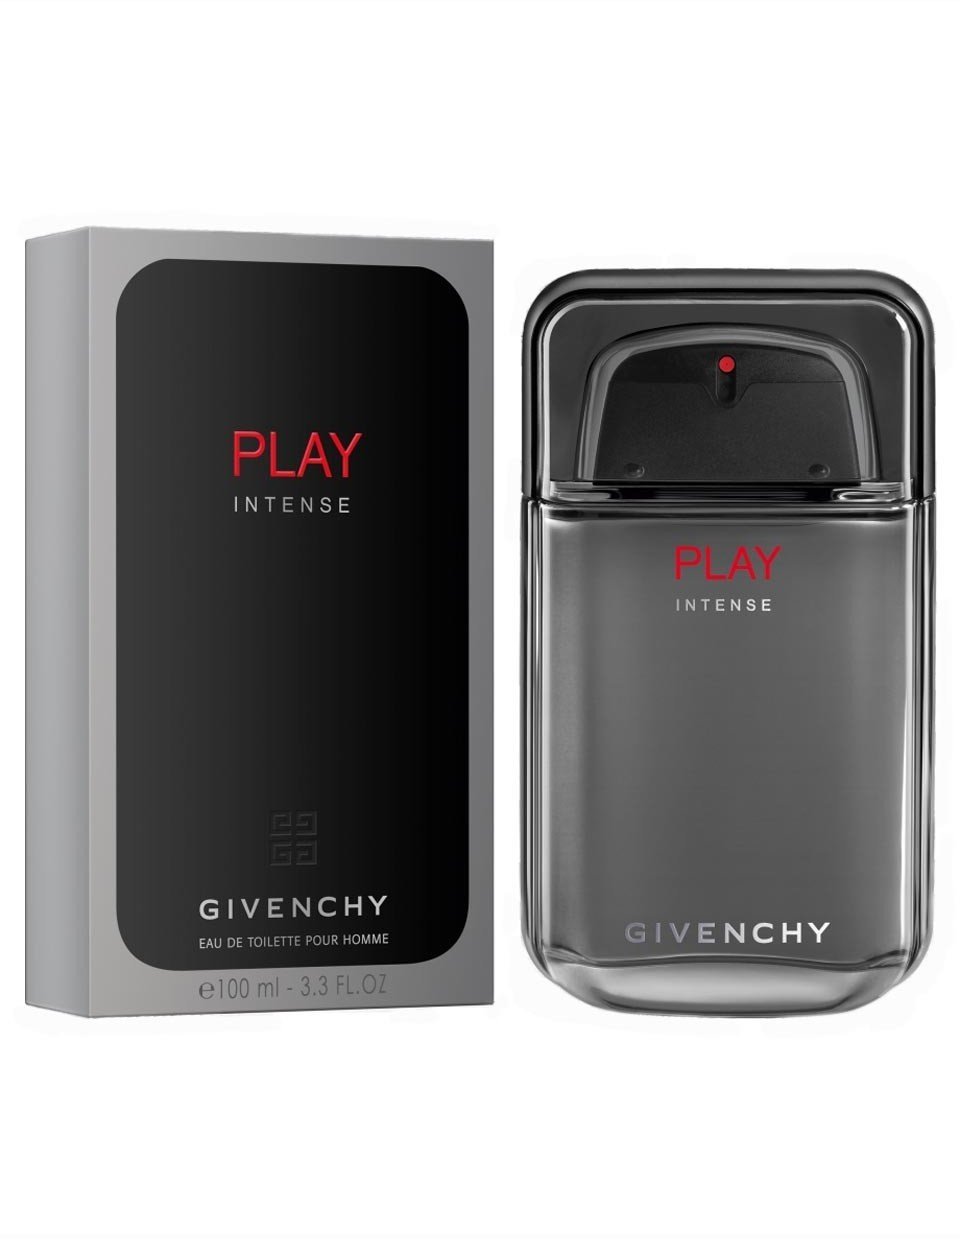 Givenchy Play Intense for Him Eau de Toilette EdT 100ml in duty-free at  airport Irkutsk